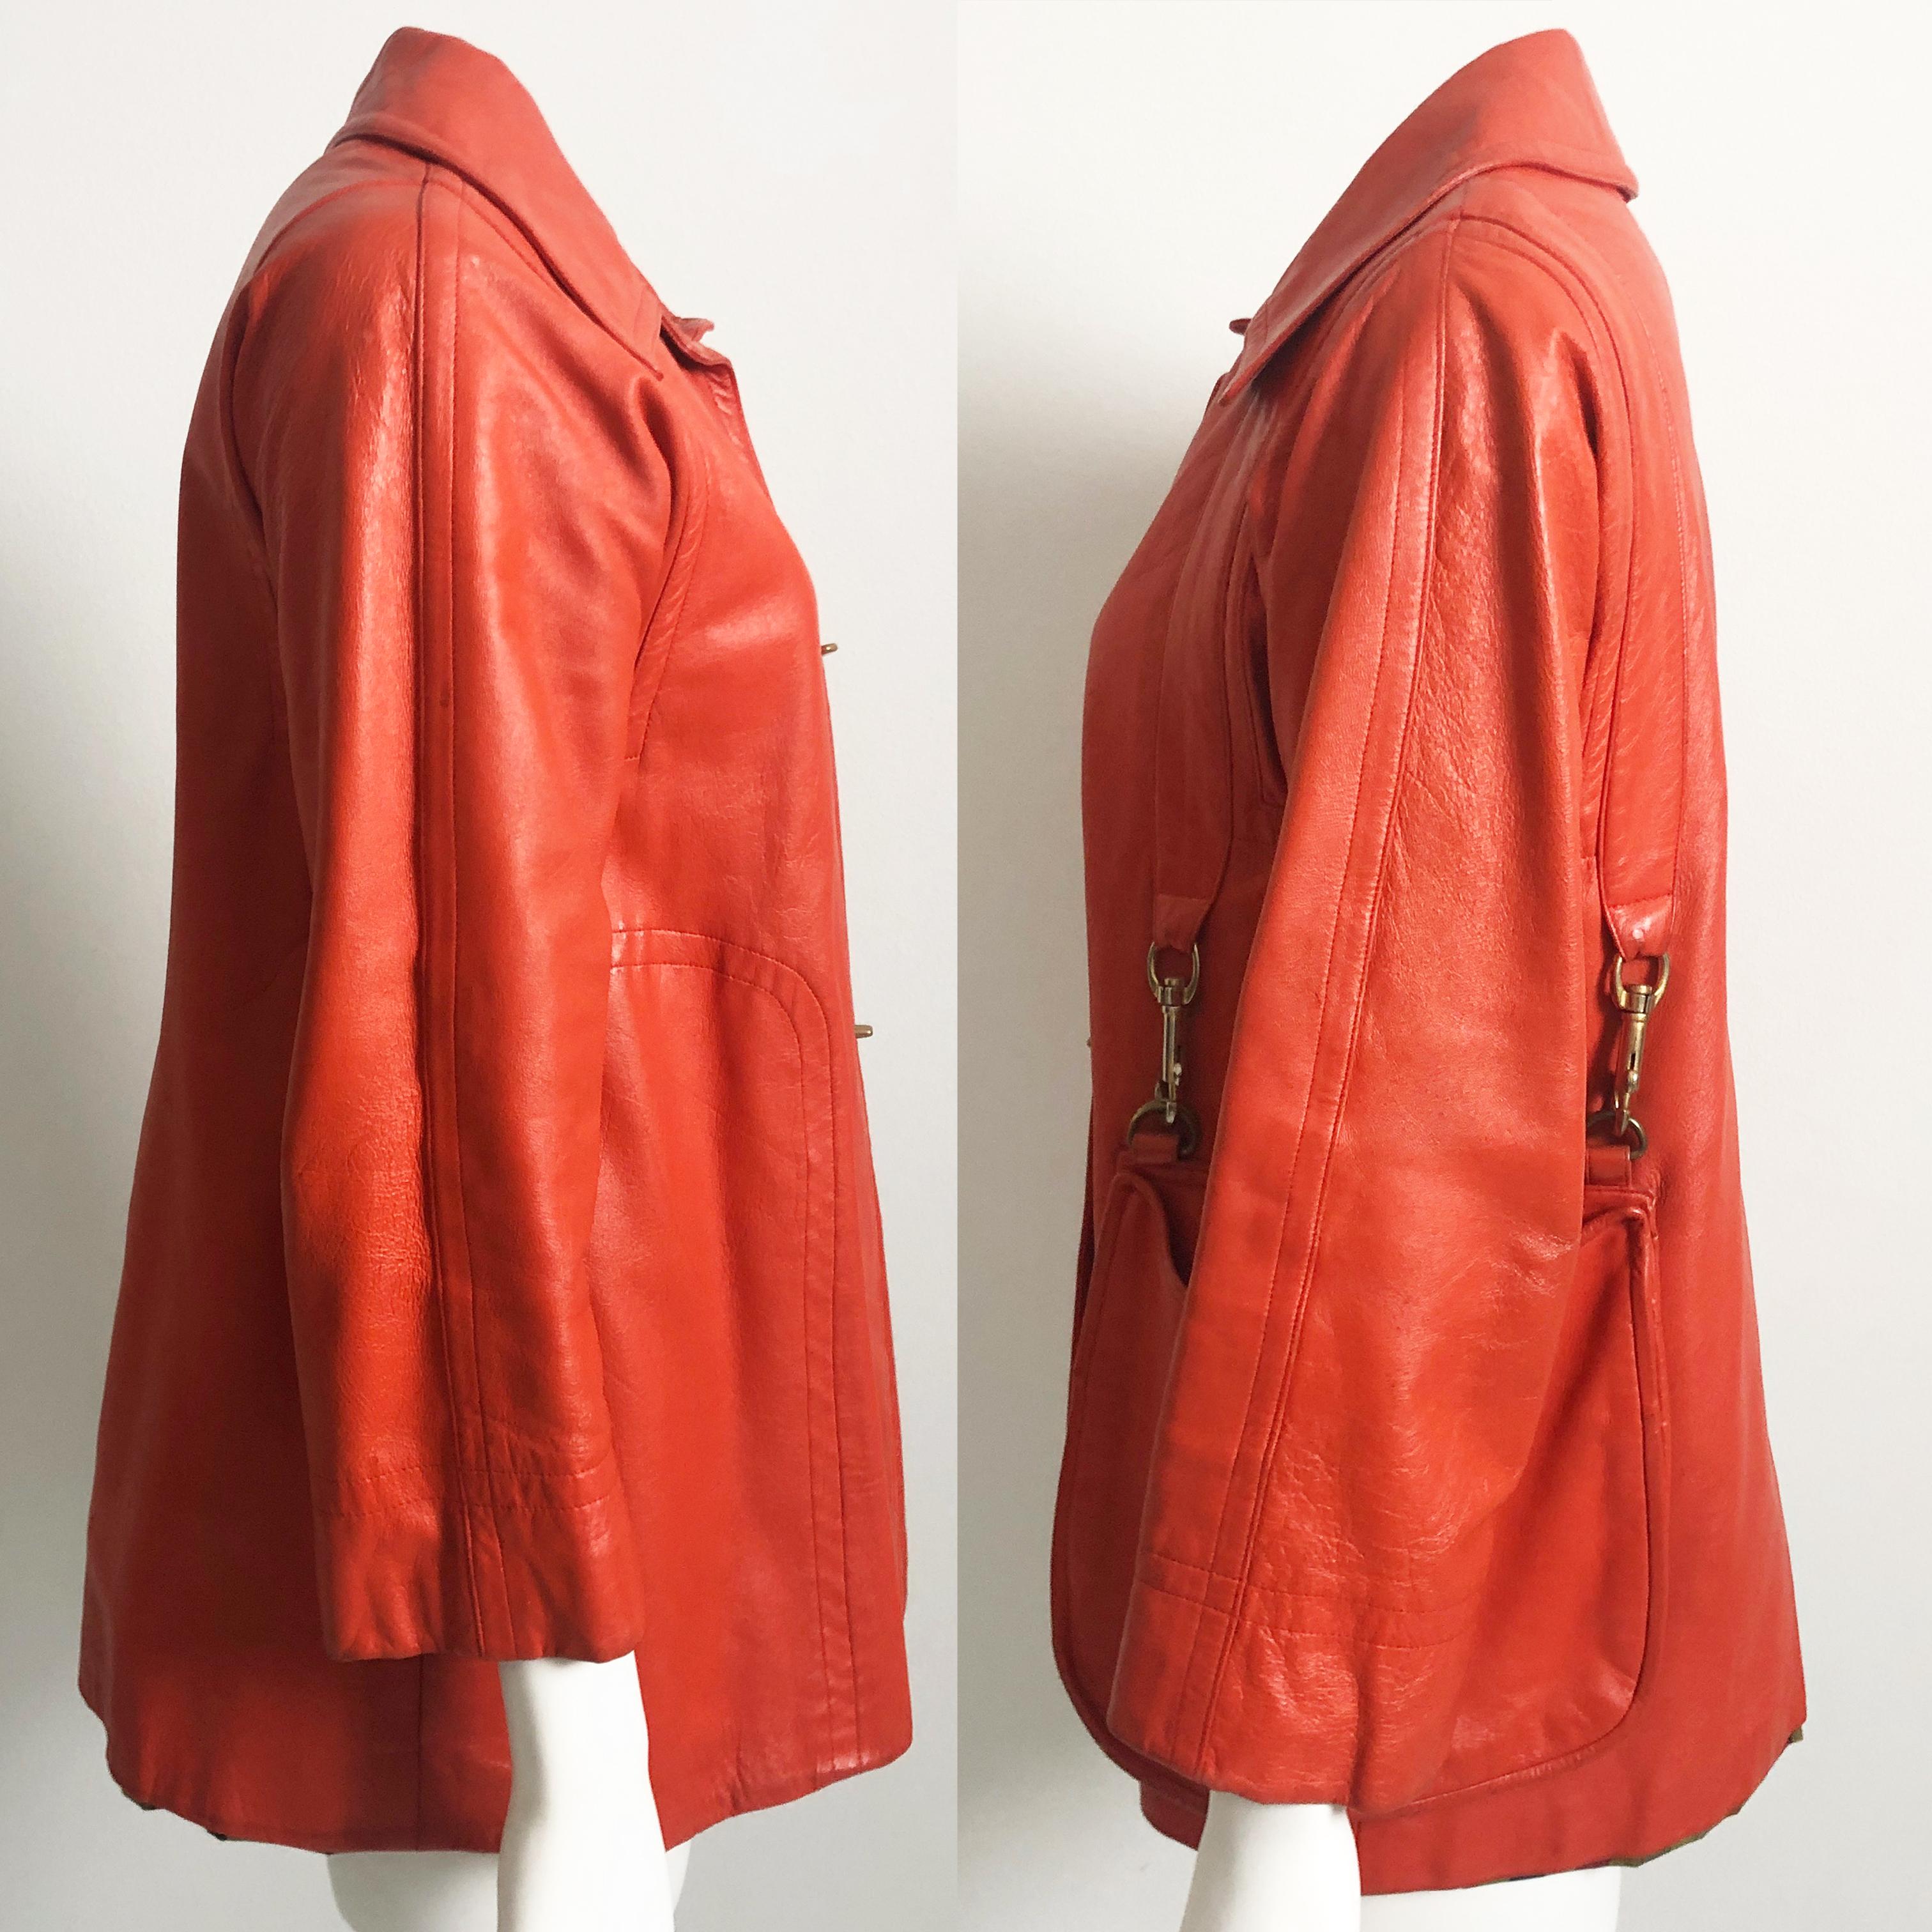 Bonnie Cashin Leather Jacket with Attached Hobo Bag Size S Mod Vintage 60s Rare  1